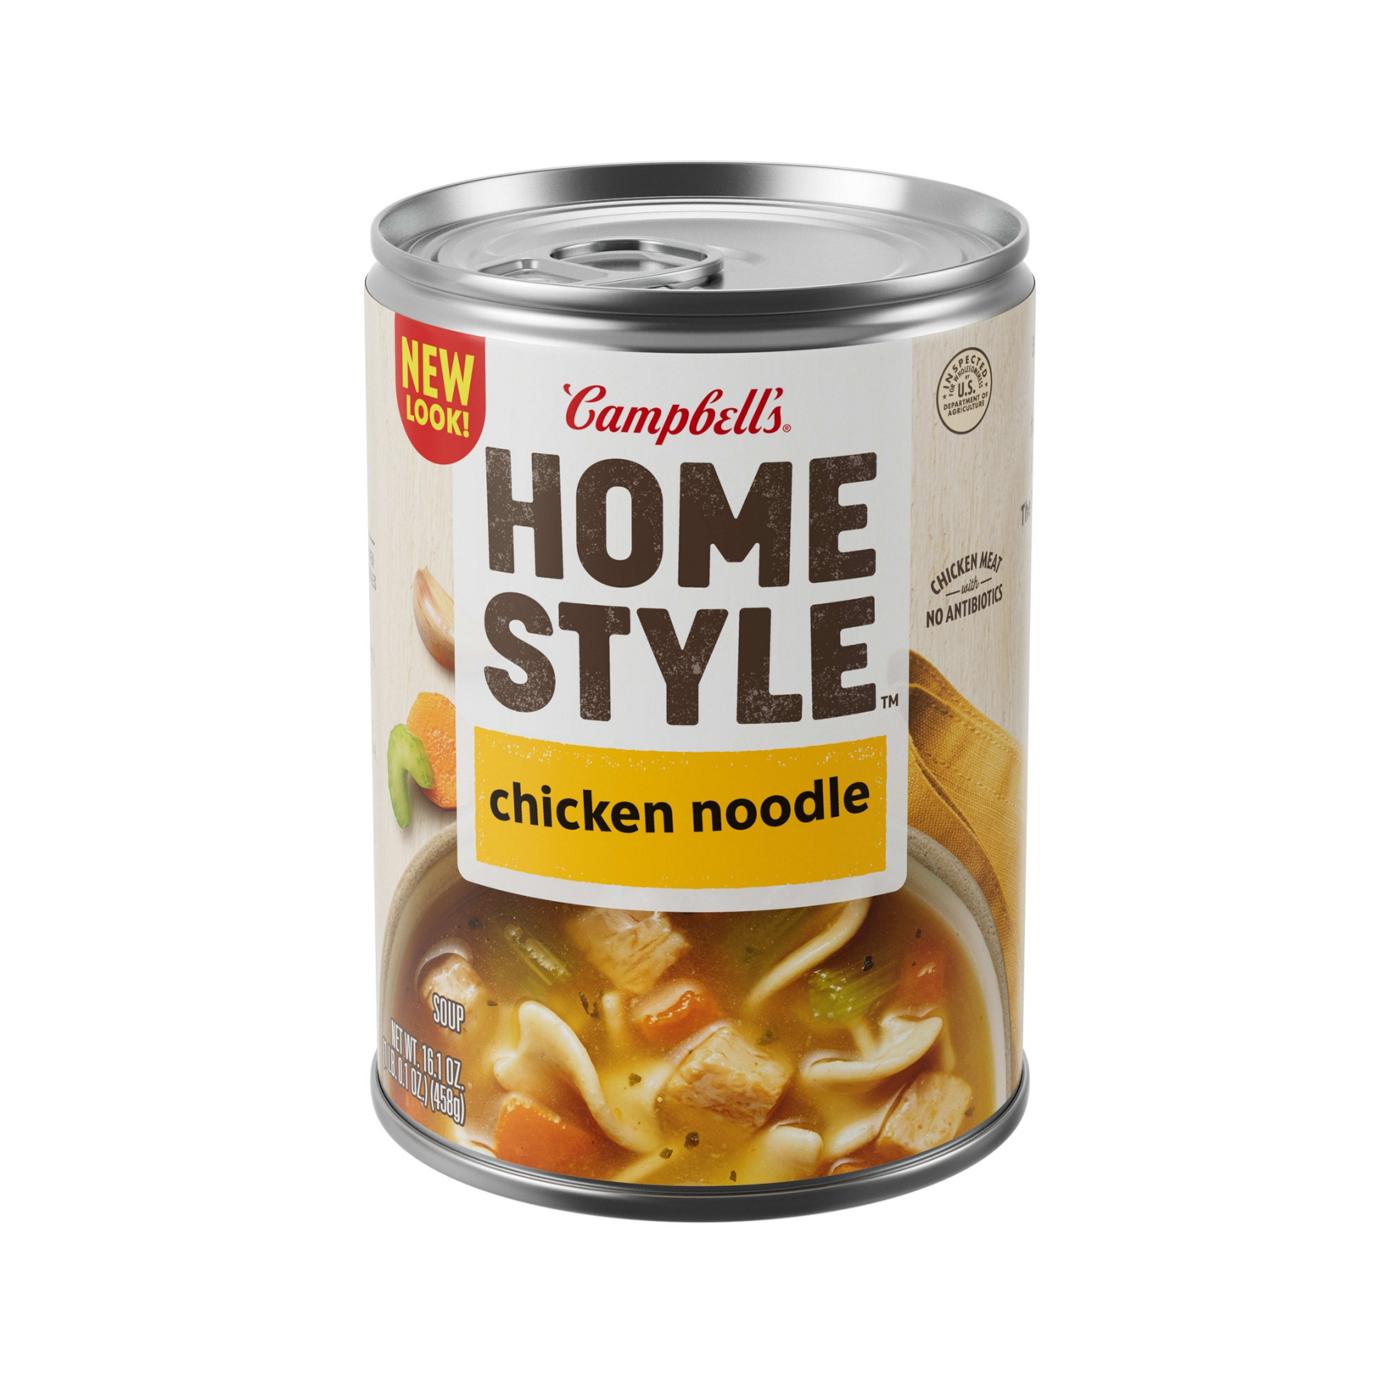 Campbell's Homestyle Chicken Noodle Soup; image 1 of 4